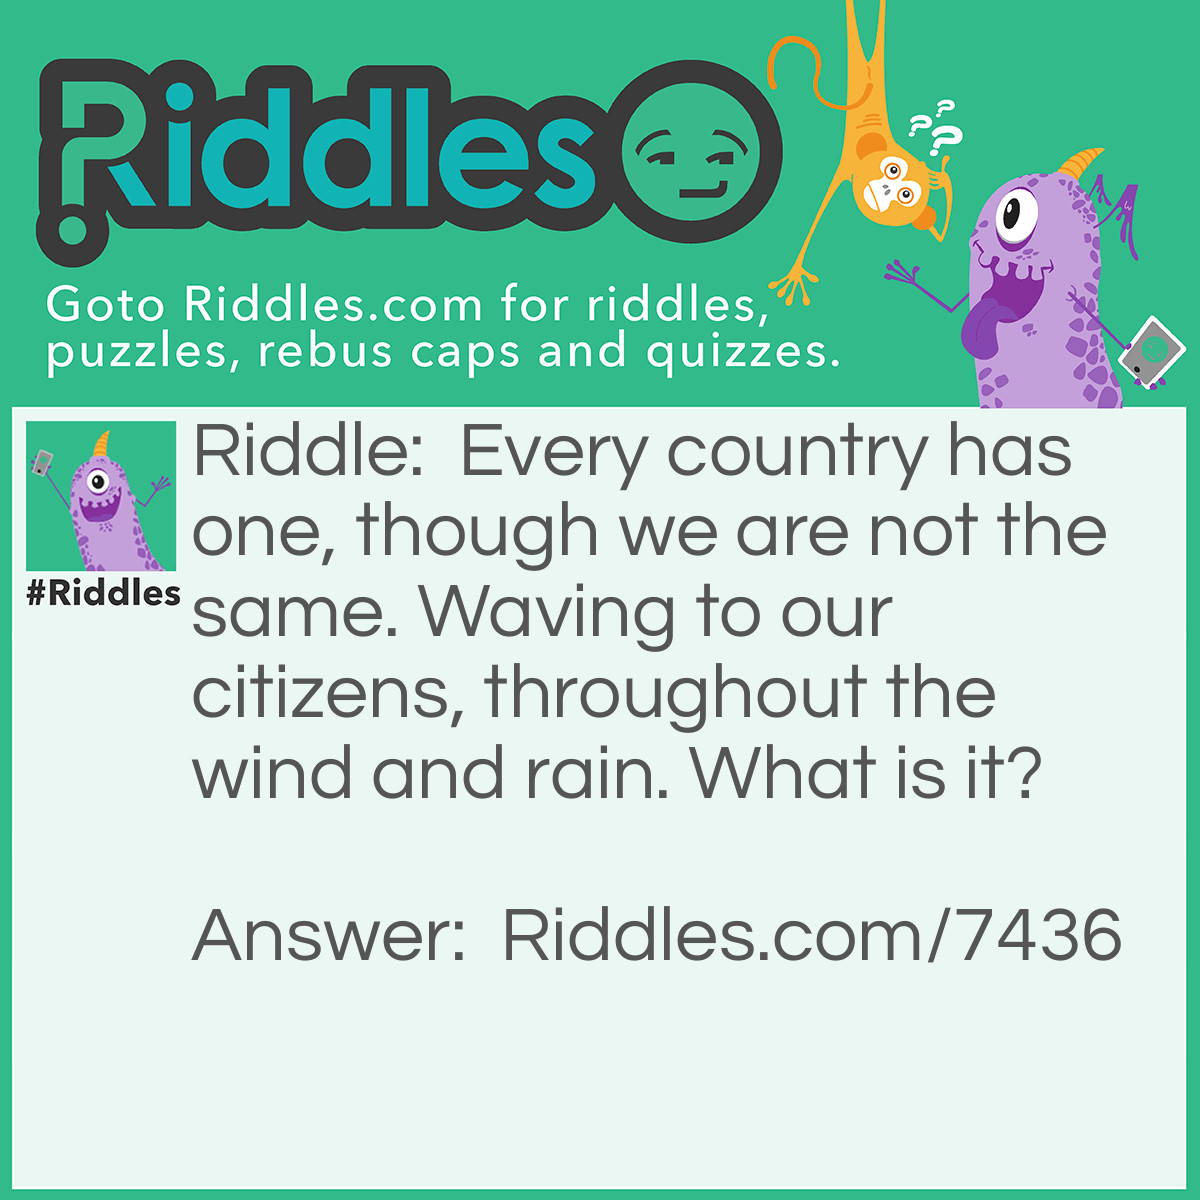 Riddle: Every country has one, though we are not the same. Waving to our citizens, throughout the wind and rain. What is it? Answer: "A Flag" - Reasoning: Every country has a flag, to represent it, and as such no 2 countries flags are alike. As they tend to be flown up on flag poles, they wave in the wind.